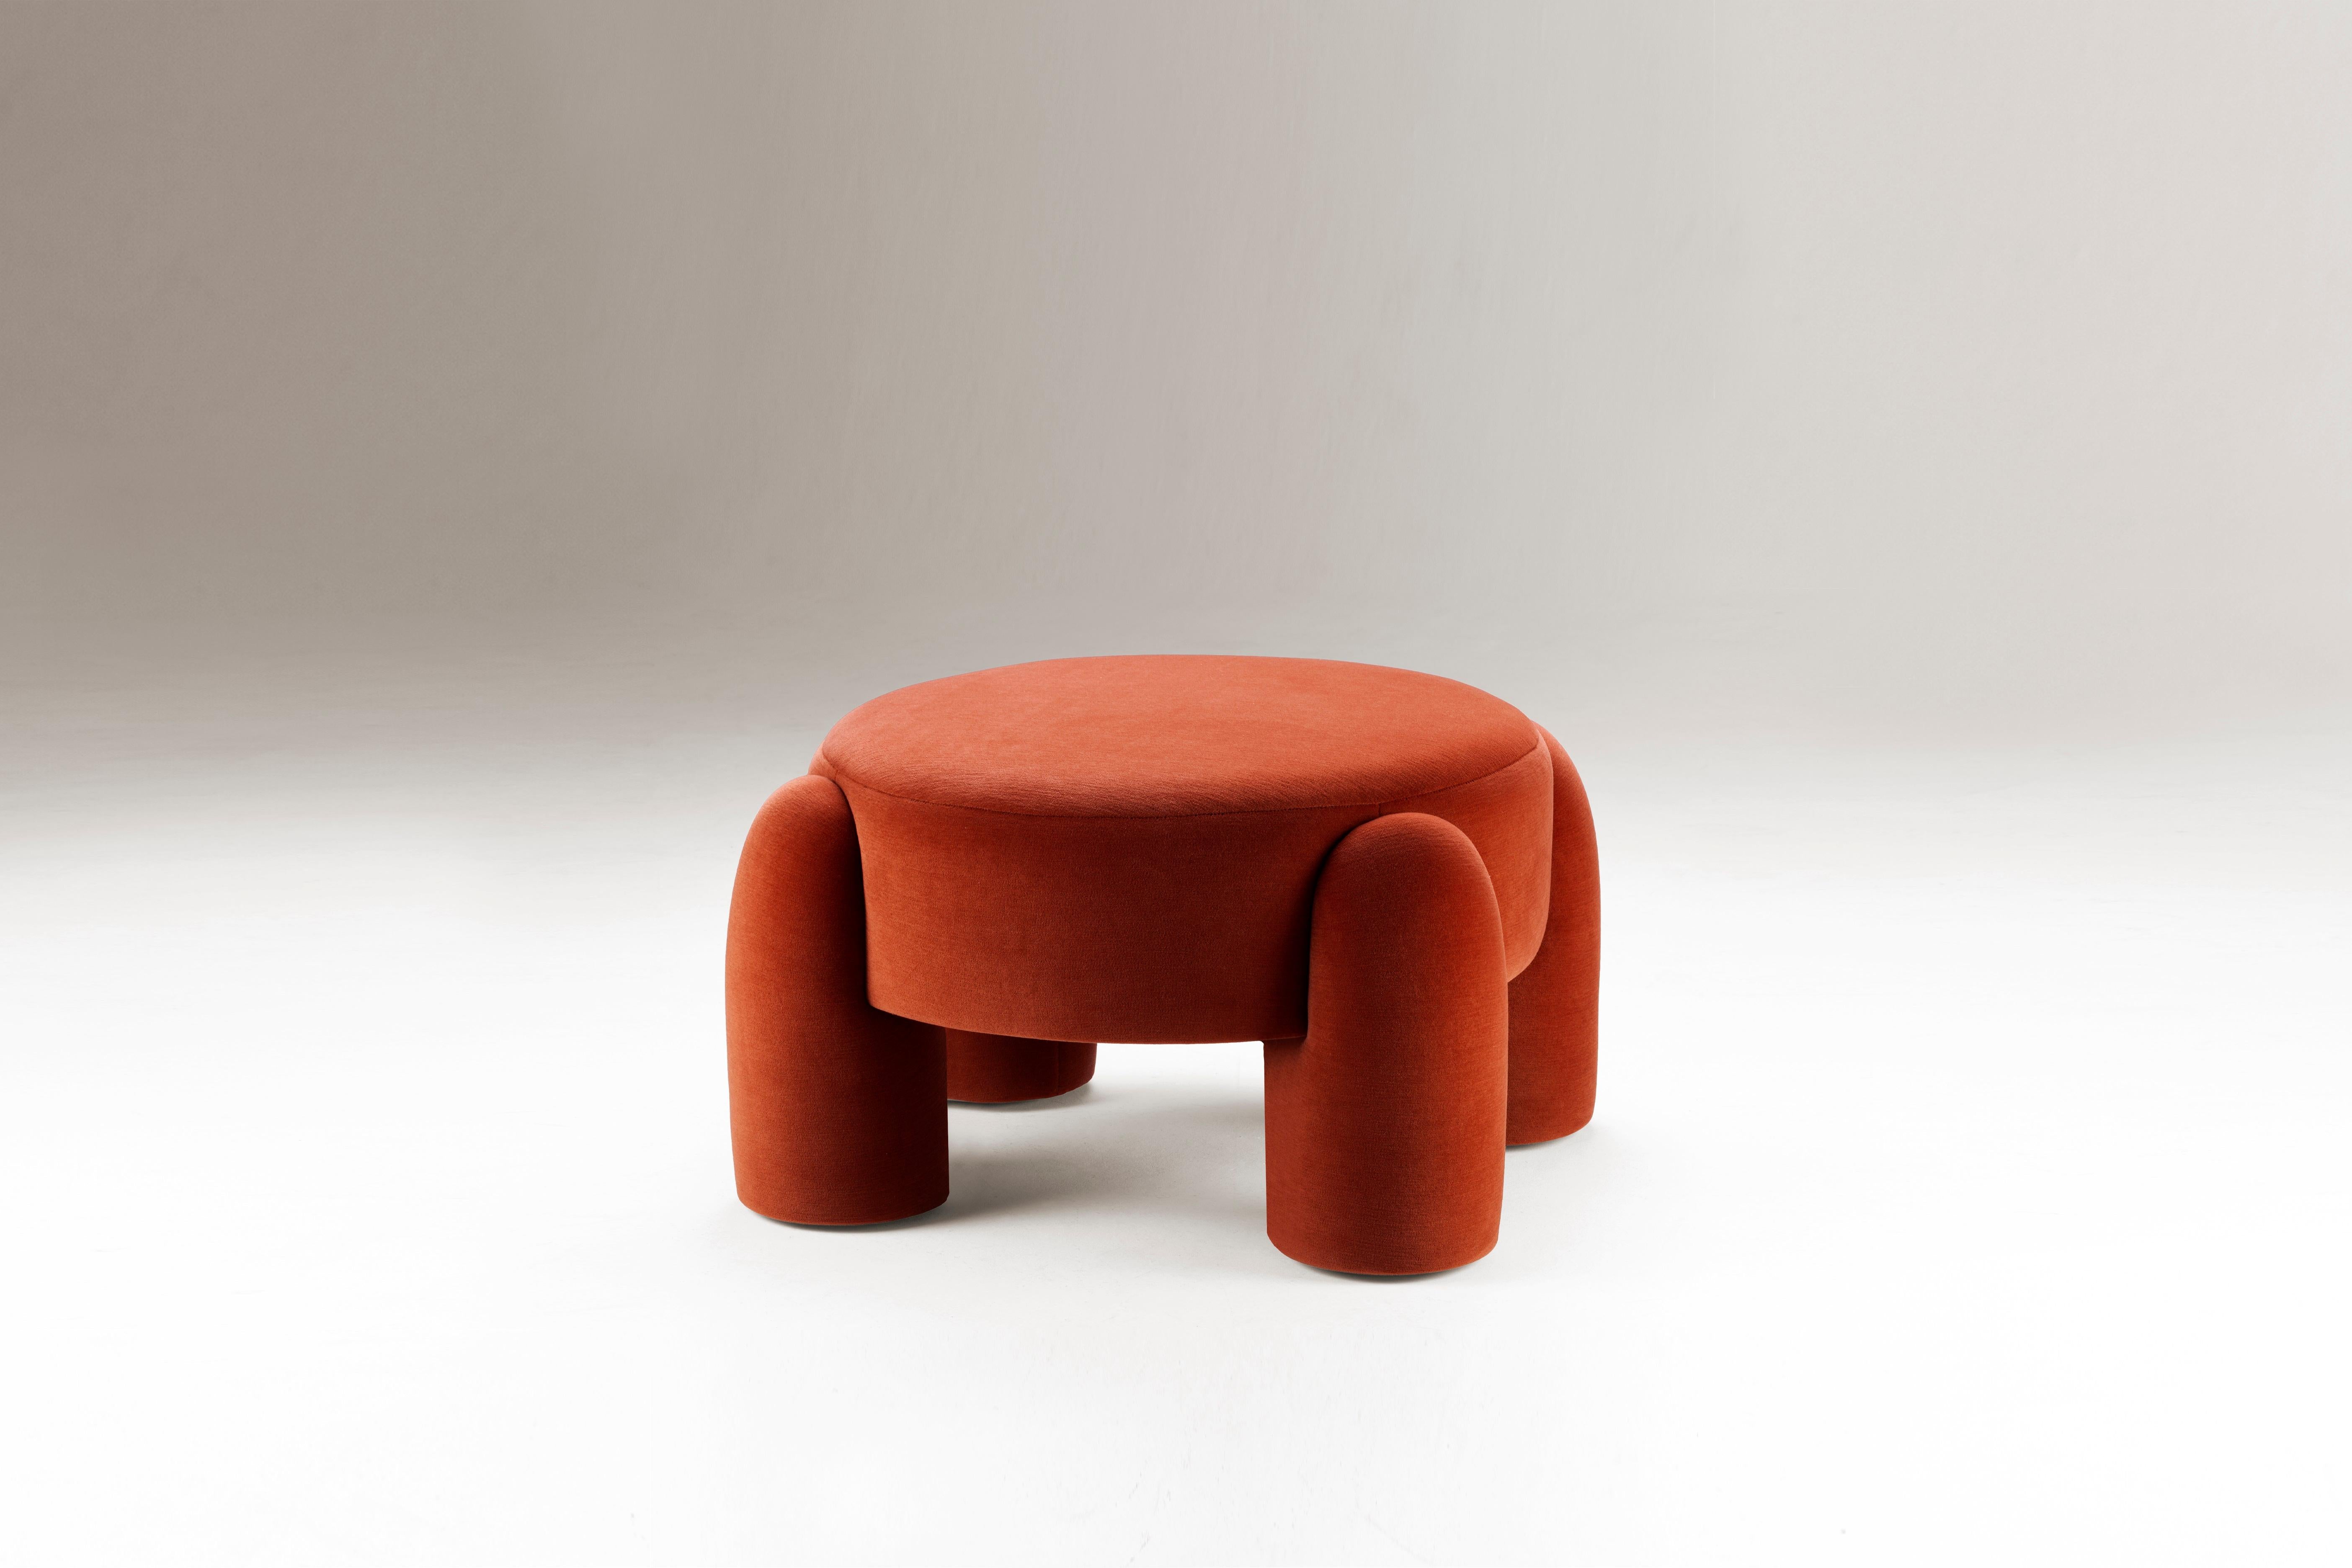 Marlon Pouf by Pietro Franceschini
Dimensions: ø 70 x H 40 cm

Materials & Finishes
Upholstery: fully upholstered in fabric or leather.

Product
When pure geometry meets soft curves, something sculptural and sensual comes out. A fine dialogue